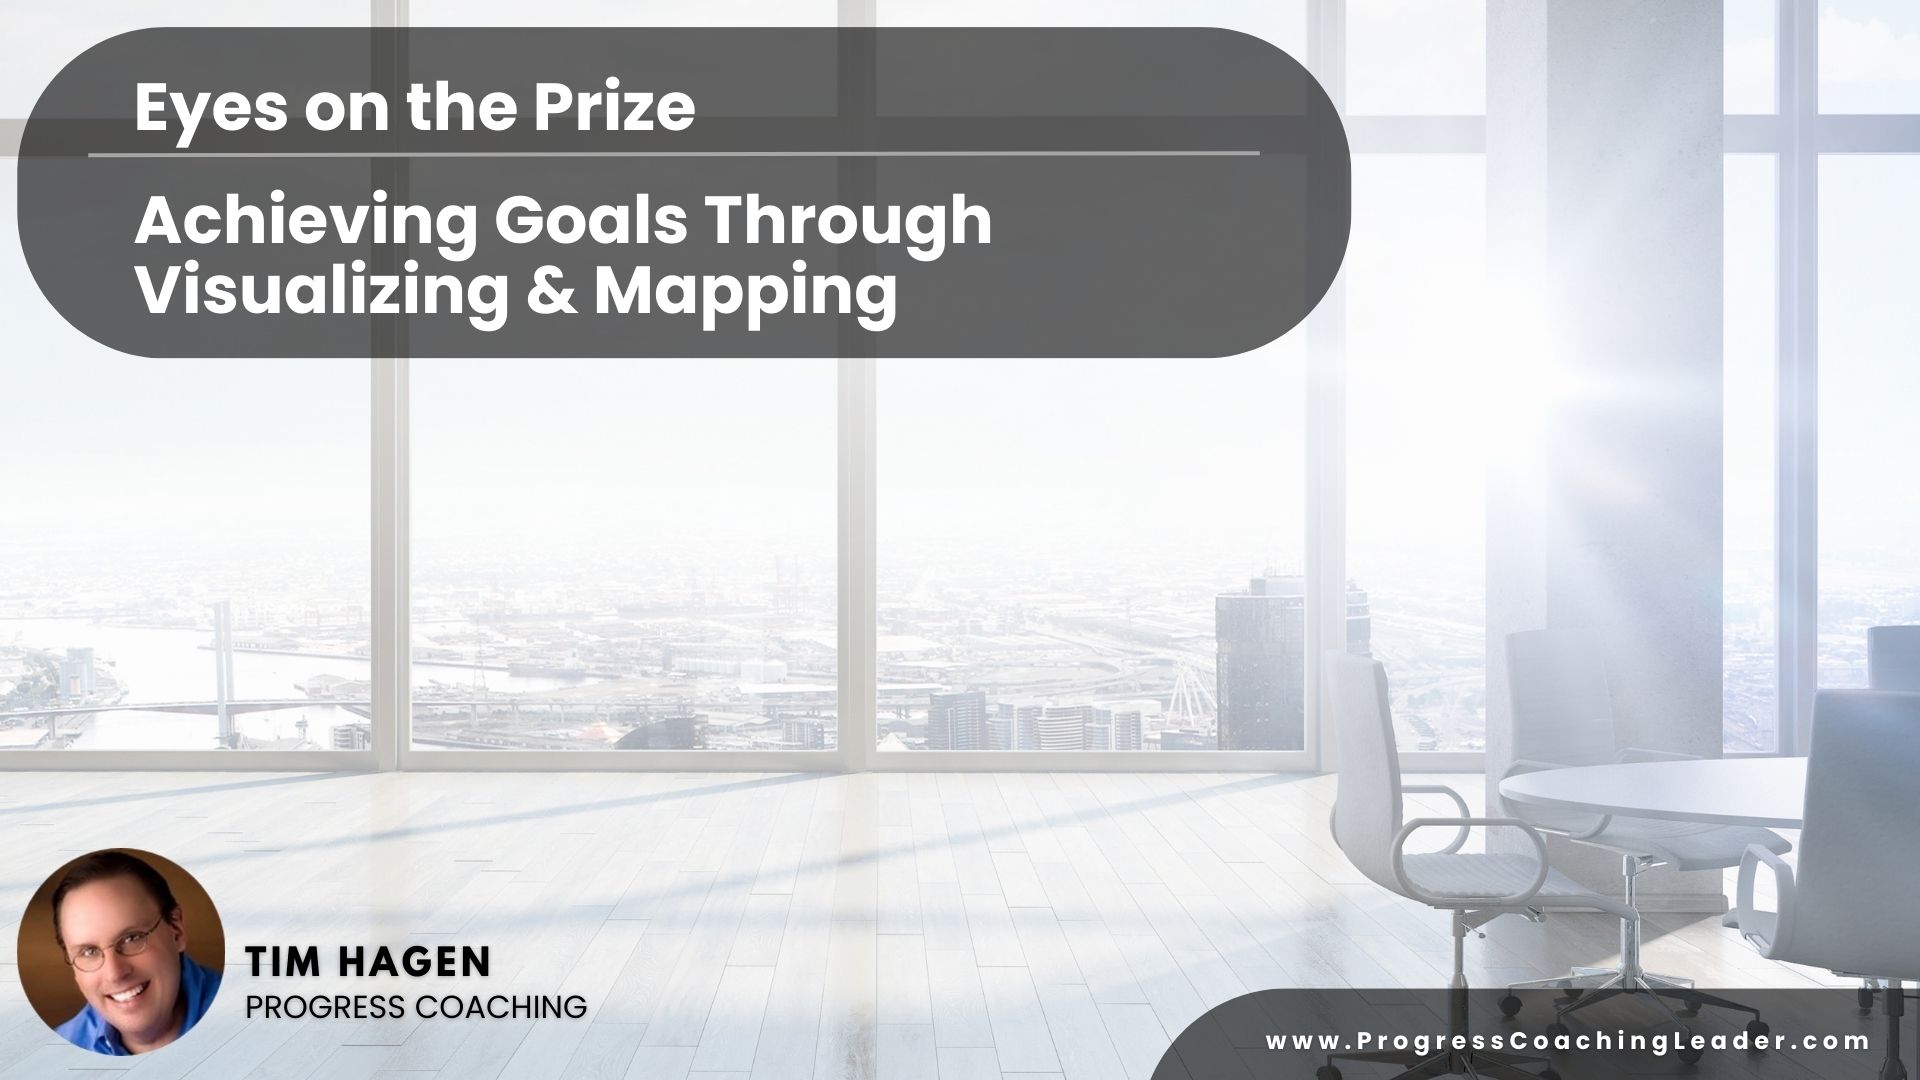 Eyes on the Prize: Achieving Goals through Visualizing & Mapping